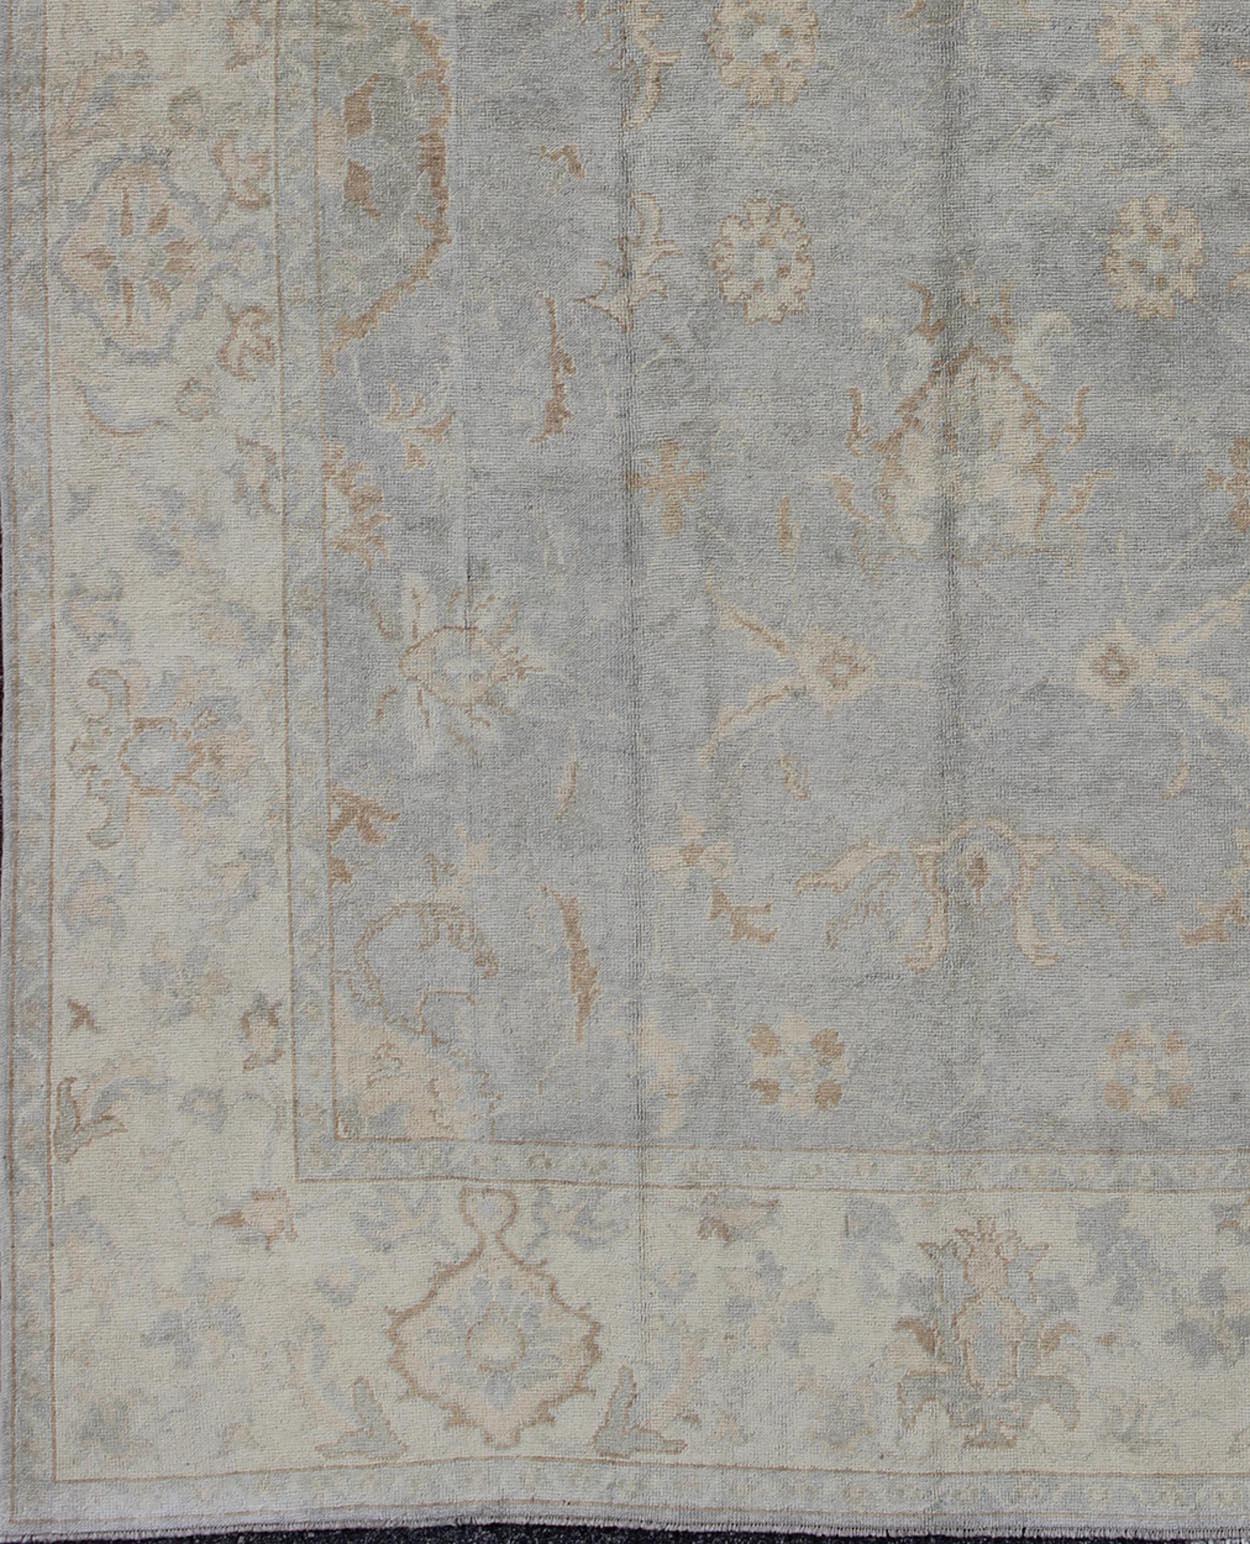 Large Turkish Oushak rug with all-over vining floral design in grey and cream, Keivan Woven Arts/ rug/ EN-112736, country of origin / type: Turkey / Oushak. Keivan Woven Arts, En-112736, 

Measures: 10'10 x 14'6.

The design of this beautiful